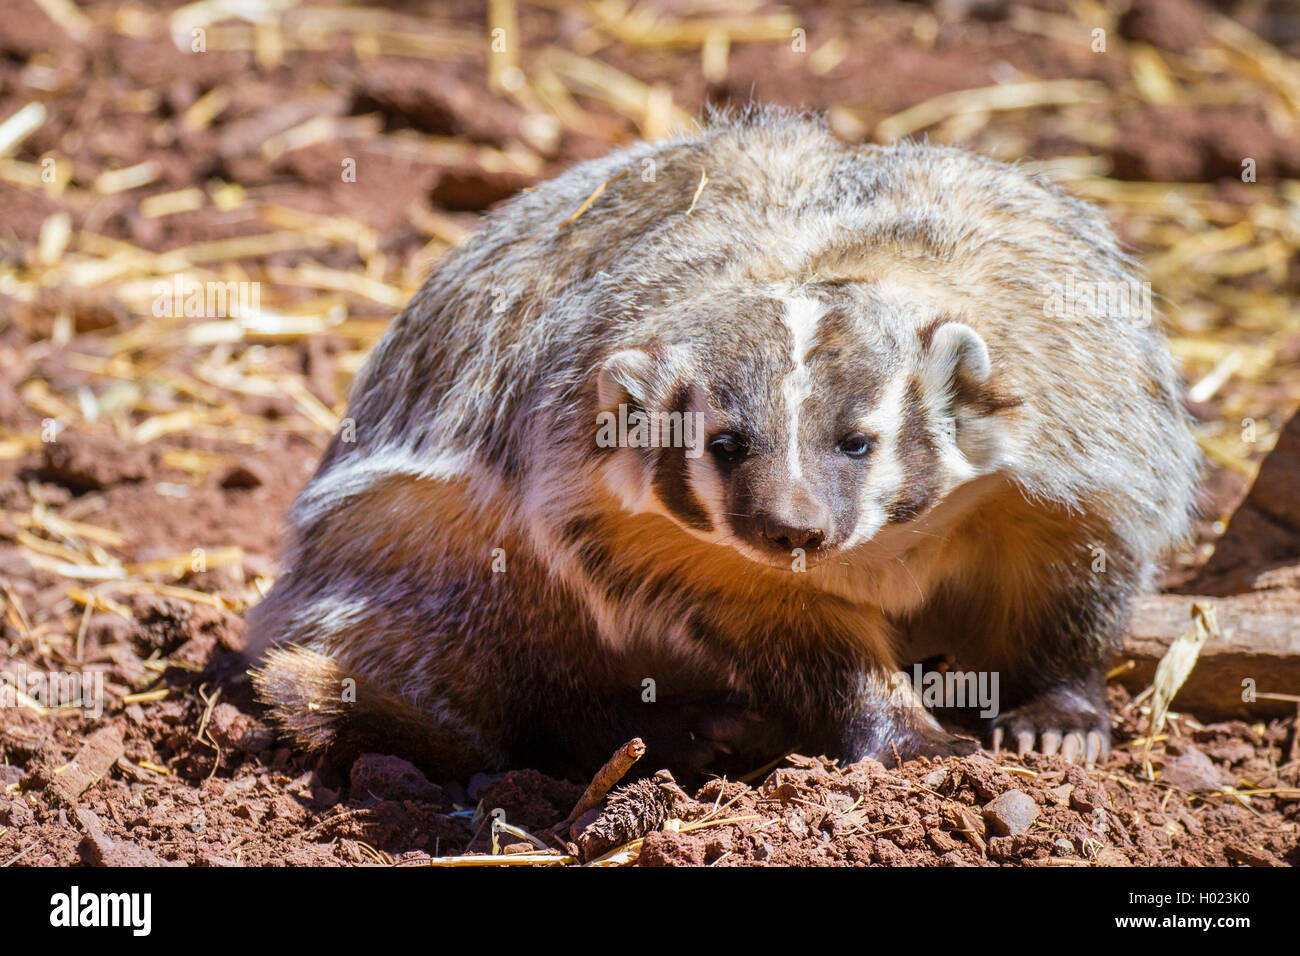 North American badger (Taxidea taxus), looks into the camera, USA Stock Photo